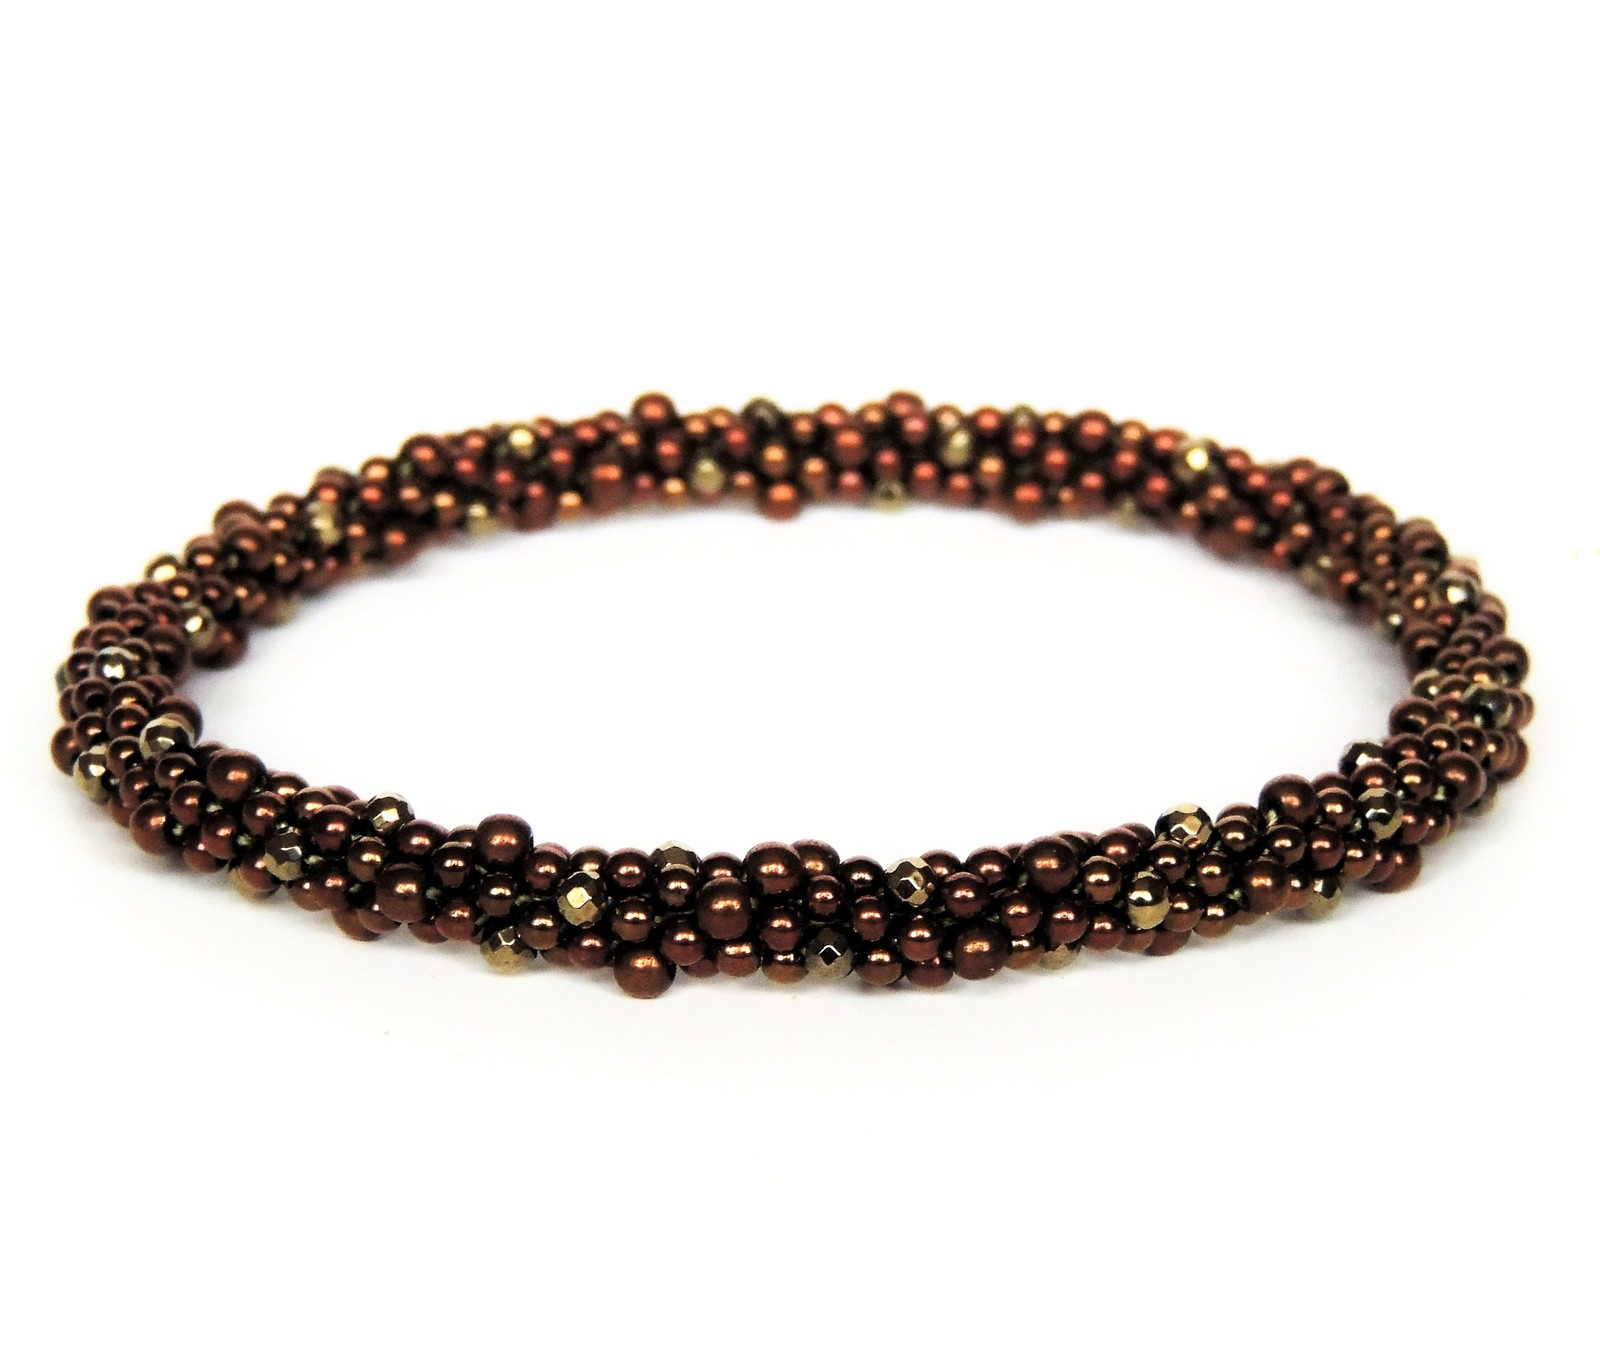 Primary image for Natural Hematite copper color Gemstone Beaded Bracelet Faceted and Round Bead 